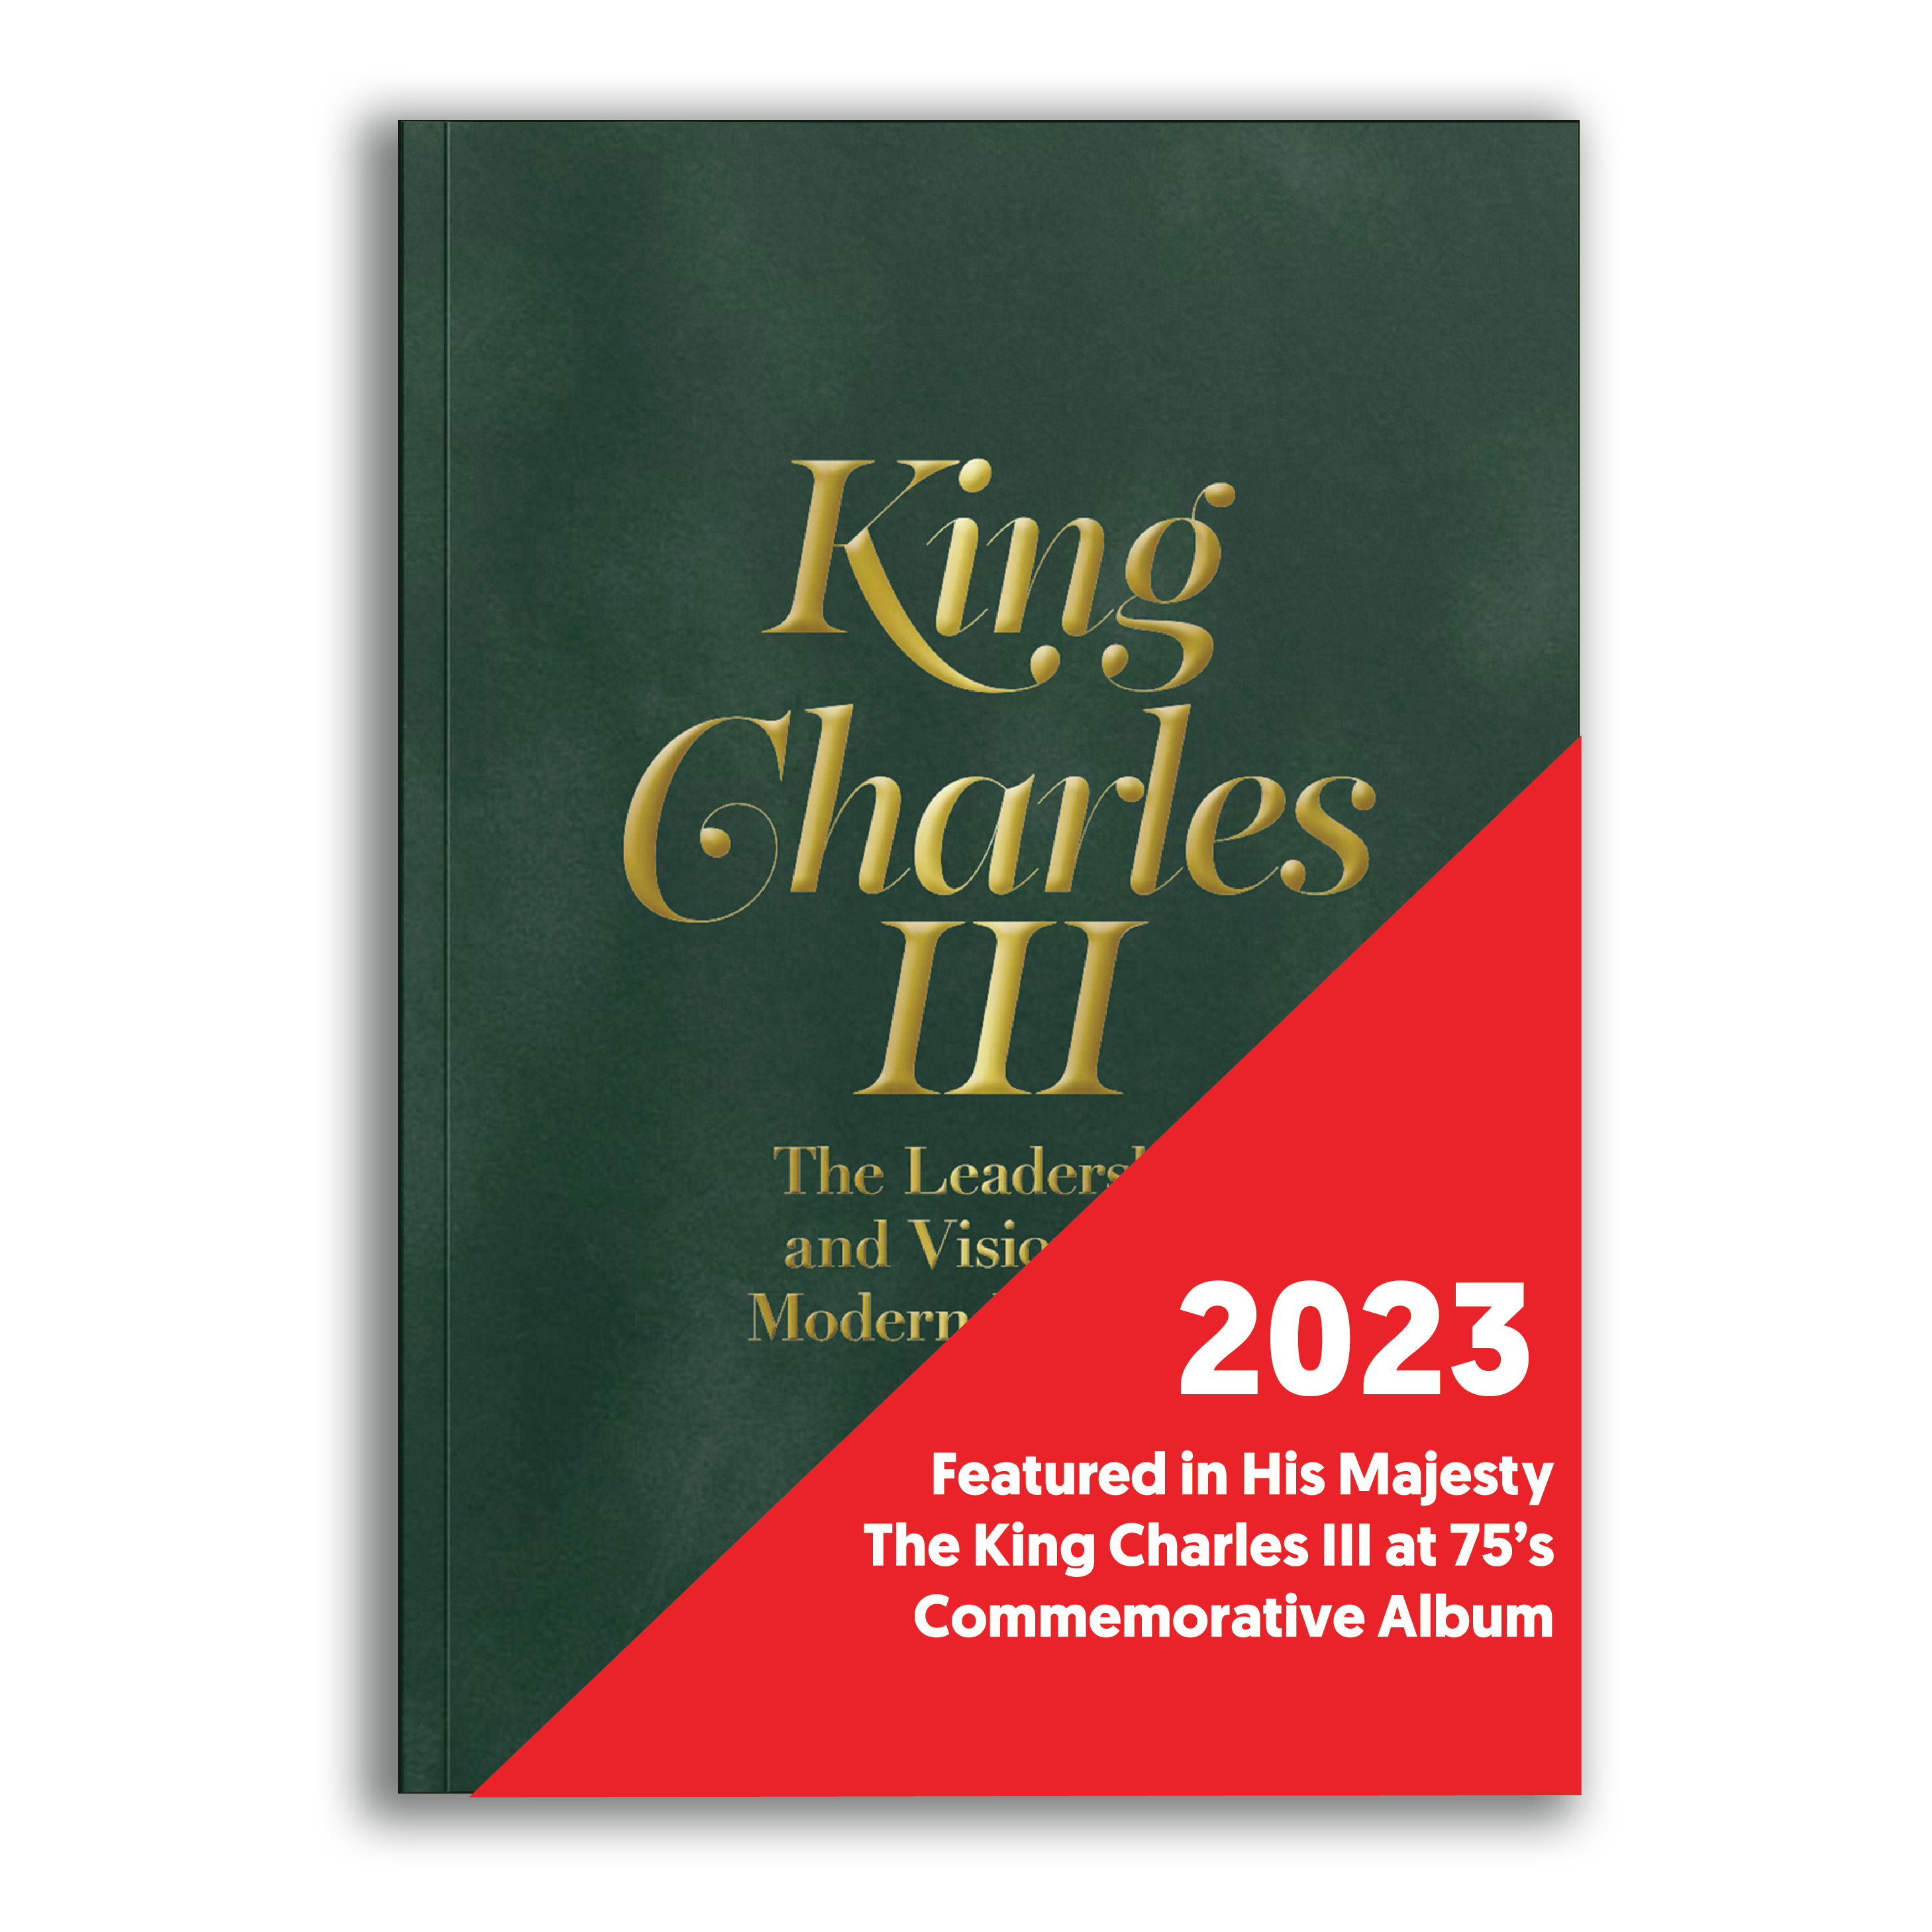 ACE EdVenture featured in his Majesty The King Charles III at 75's Commemorative Album.